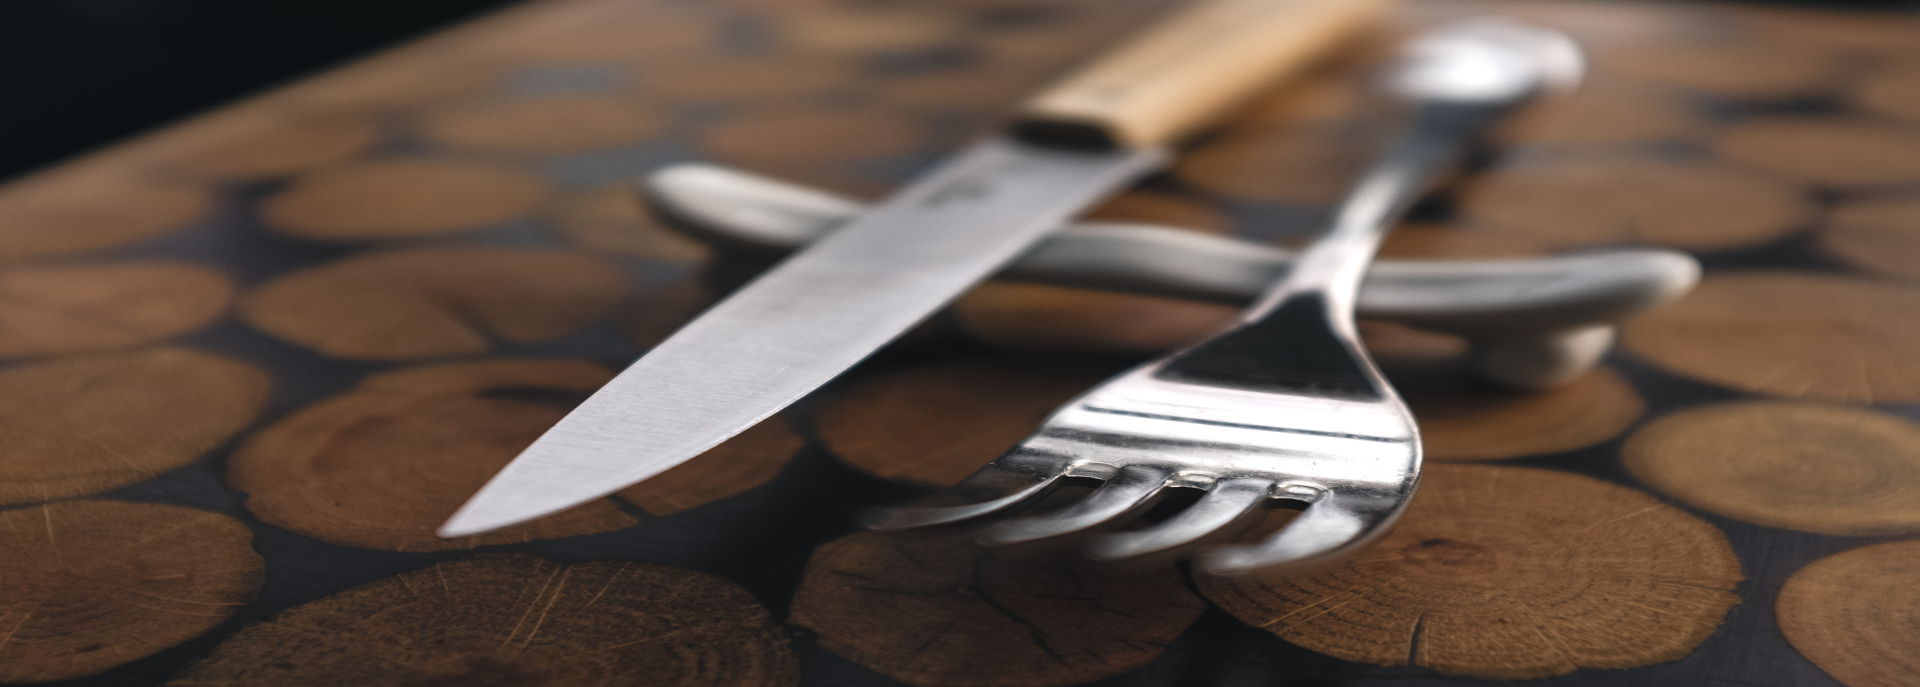 foodiesfeed.com_fork-and-steak-knife-close-up